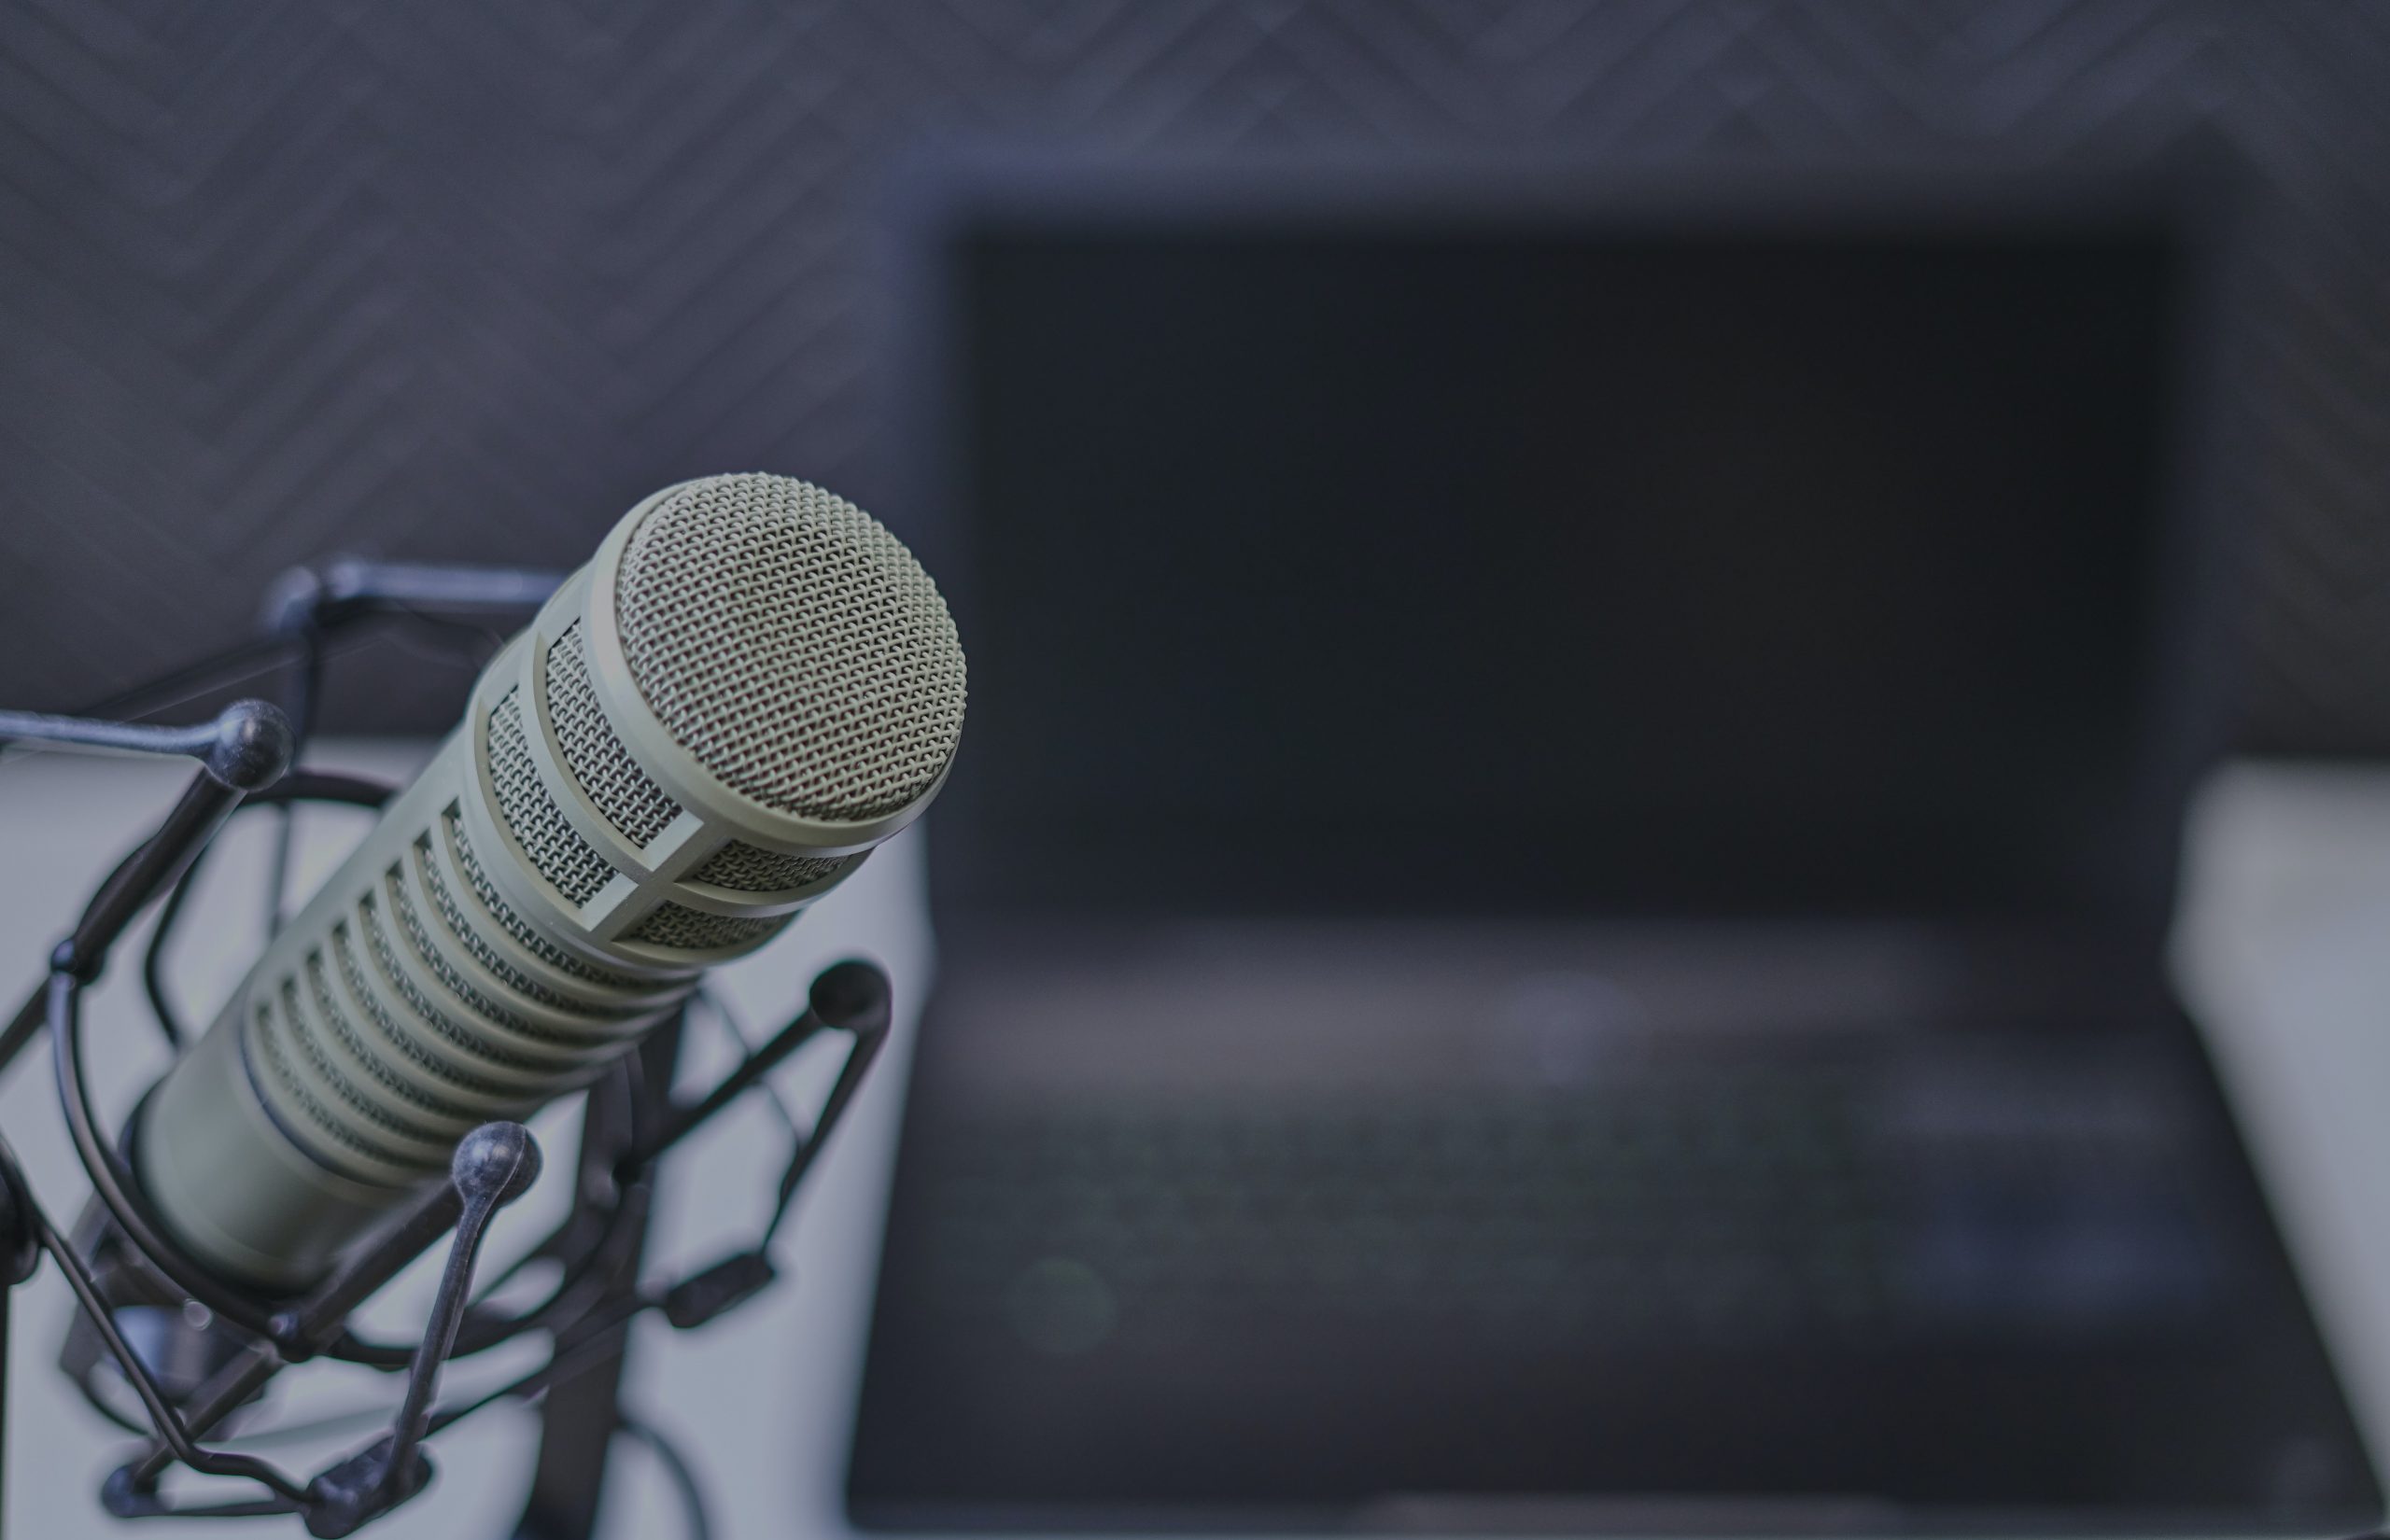 Acast is now the biggest podcasting company in the US after buying startup RadioPublic